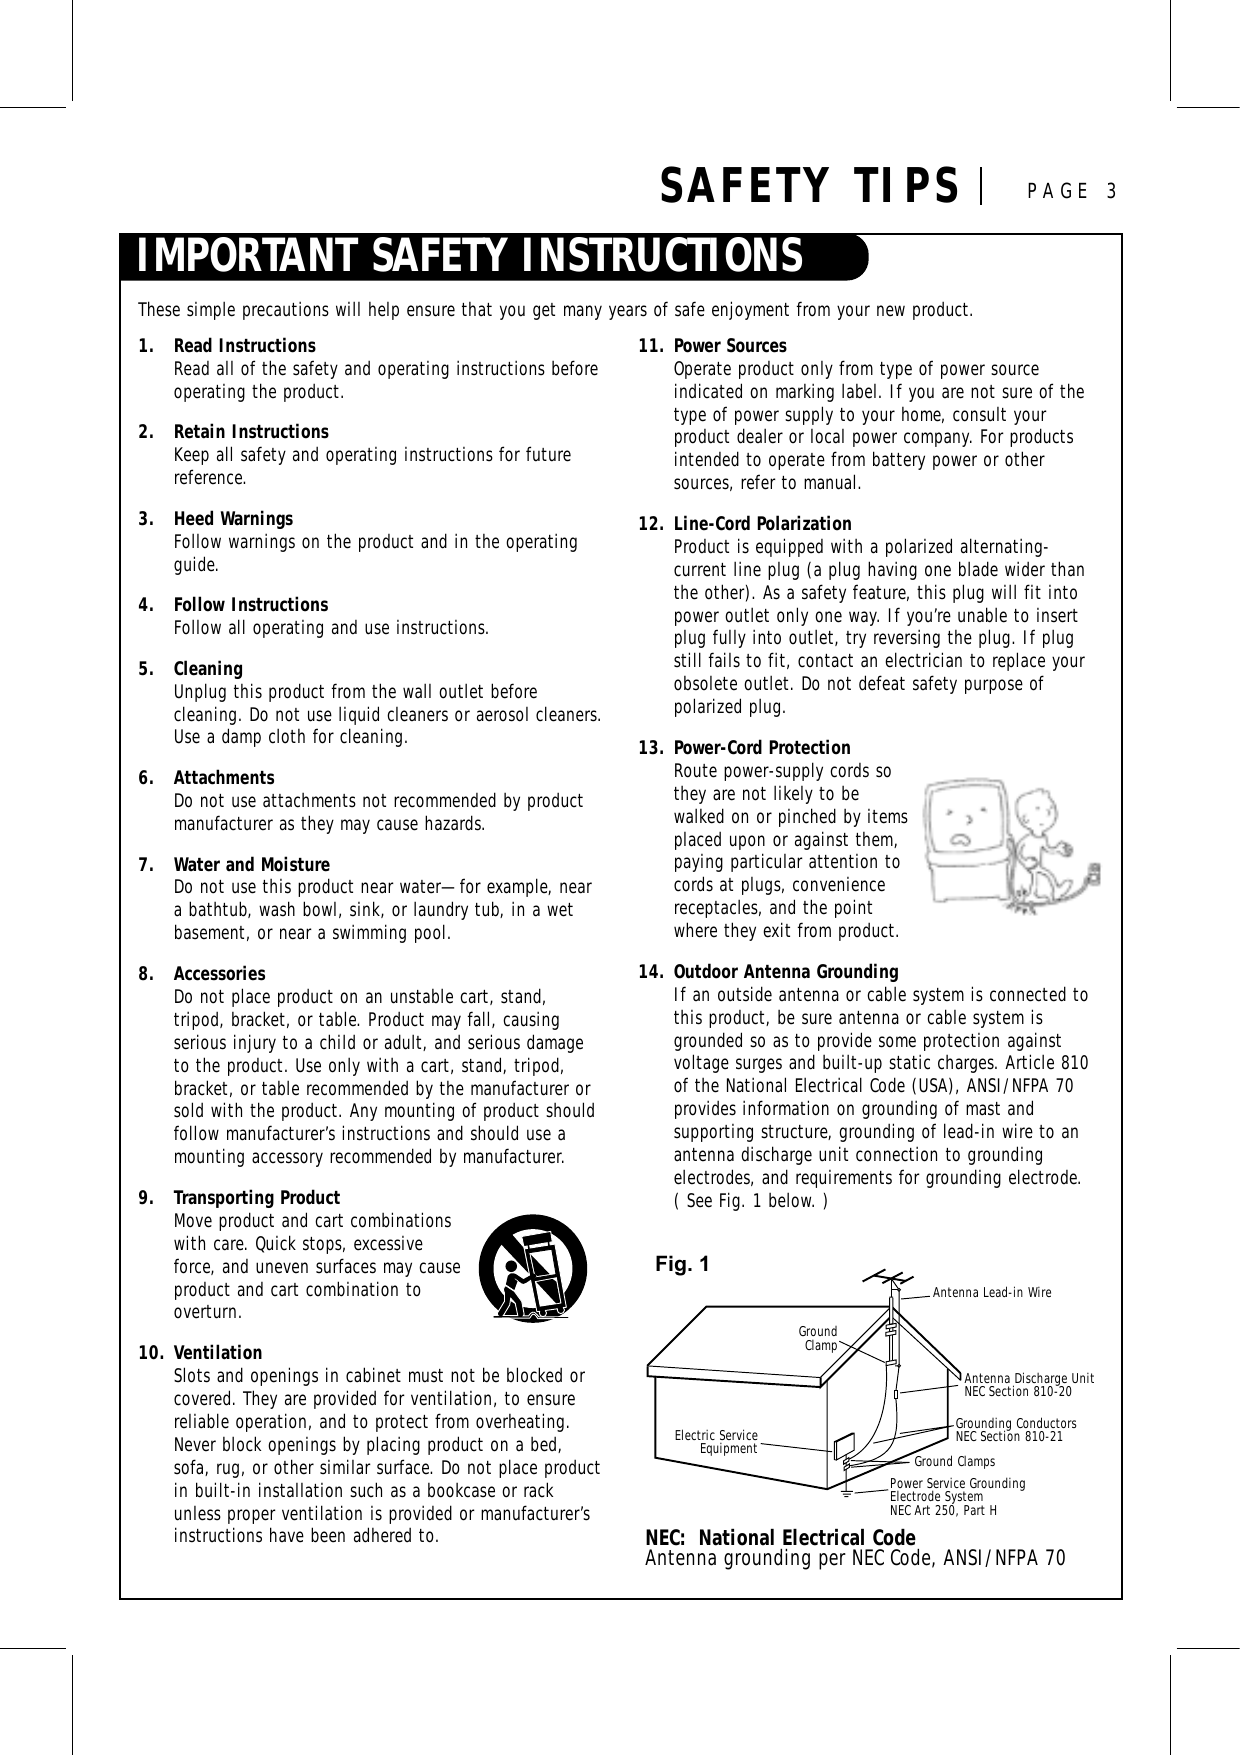 IMPORTANT SAFETY INSTRUCTIONSSAFETY TIPS PAGE 31. Read InstructionsRead all of the safety and operating instructions beforeoperating the product.2. Retain InstructionsKeep all safety and operating instructions for futurereference.3. Heed WarningsFollow warnings on the product and in the operatingguide.4. Follow InstructionsFollow all operating and use instructions.5. CleaningUnplug this product from the wall outlet before cleaning. Do not use liquid cleaners or aerosol cleaners.Use a damp cloth for cleaning.6. AttachmentsDo not use attachments not recommended by productmanufacturer as they may cause hazards.7. Water and MoistureDo not use this product near water—for example, neara bathtub, wash bowl, sink, or laundry tub, in a wetbasement, or near a swimming pool.8. AccessoriesDo not place product on an unstable cart, stand, tripod, bracket, or table. Product may fall, causing serious injury to a child or adult, and serious damageto the product. Use only with a cart, stand, tripod,bracket, or table recommended by the manufacturer orsold with the product. Any mounting of product shouldfollow manufacturer’s instructions and should use amounting accessory recommended by manufacturer.9. Transporting ProductMove product and cart combinationswith care. Quick stops, excessiveforce, and uneven surfaces may causeproduct and cart combination tooverturn.10. VentilationSlots and openings in cabinet must not be blocked orcovered. They are provided for ventilation, to ensurereliable operation, and to protect from overheating.Never block openings by placing product on a bed,sofa, rug, or other similar surface. Do not place productin built-in installation such as a bookcase or rackunless proper ventilation is provided or manufacturer’sinstructions have been adhered to.11. Power Sources Operate product only from type of power source indicated on marking label. If you are not sure of thetype of power supply to your home, consult your product dealer or local power company. For productsintended to operate from battery power or othersources, refer to manual.12. Line-Cord PolarizationProduct is equipped with a polarized alternating-current line plug (a plug having one blade wider thanthe other). As a safety feature, this plug will fit intopower outlet only one way. If you’re unable to insertplug fully into outlet, try reversing the plug. If plugstill fails to fit, contact an electrician to replace yourobsolete outlet. Do not defeat safety purpose of polarized plug.13. Power-Cord ProtectionRoute power-supply cords sothey are not likely to bewalked on or pinched by itemsplaced upon or against them,paying particular attention tocords at plugs, conveniencereceptacles, and the pointwhere they exit from product.14. Outdoor Antenna GroundingIf an outside antenna or cable system is connected tothis product, be sure antenna or cable system isgrounded so as to provide some protection againstvoltage surges and built-up static charges. Article 810of the National Electrical Code (USA), ANSI/NFPA 70provides information on grounding of mast and supporting structure, grounding of lead-in wire to anantenna discharge unit connection to grounding electrodes, and requirements for grounding electrode. ( See Fig. 1 below. )These simple precautions will help ensure that you get many years of safe enjoyment from your new product.Antenna Lead-in WireAntenna Discharge UnitNEC Section 810-20 Grounding ConductorsNEC Section 810-21Ground ClampsPower Service Grounding Electrode System NEC Art 250, Part HGroundClampElectric ServiceEquipmentNEC:  National Electrical CodeAntenna grounding per NEC Code, ANSI/NFPA 70Fig. 1